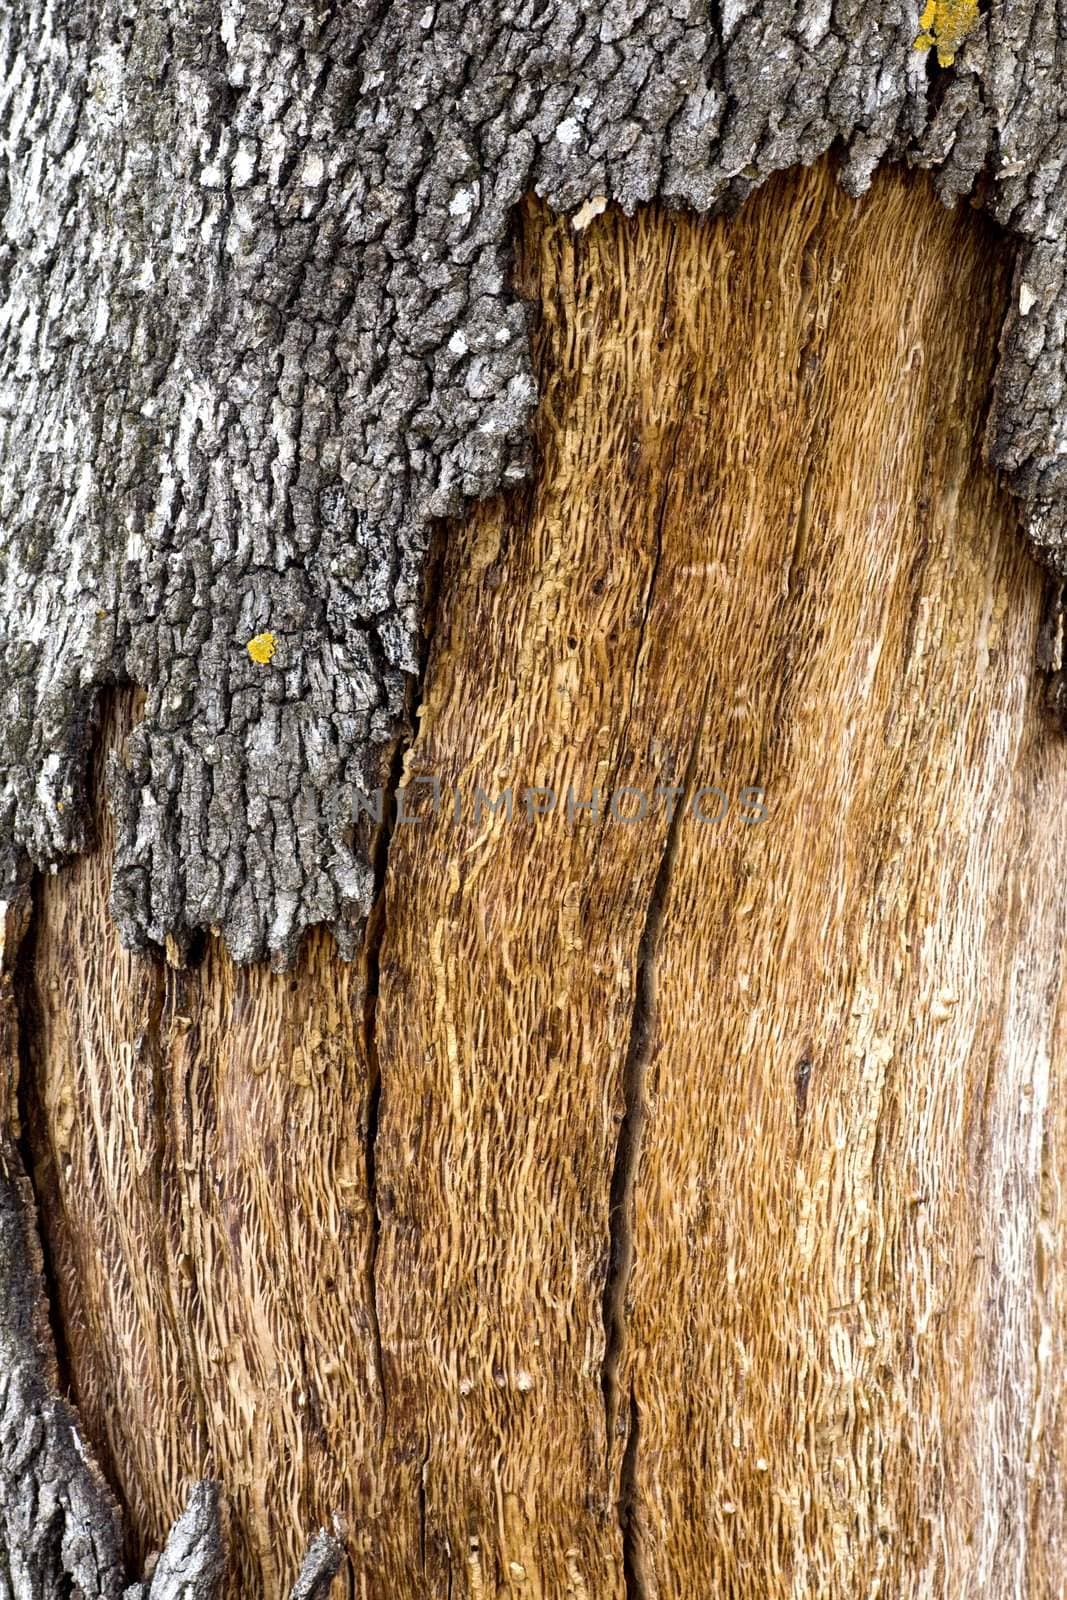 Close up view of a quercus suber tree bark texture.